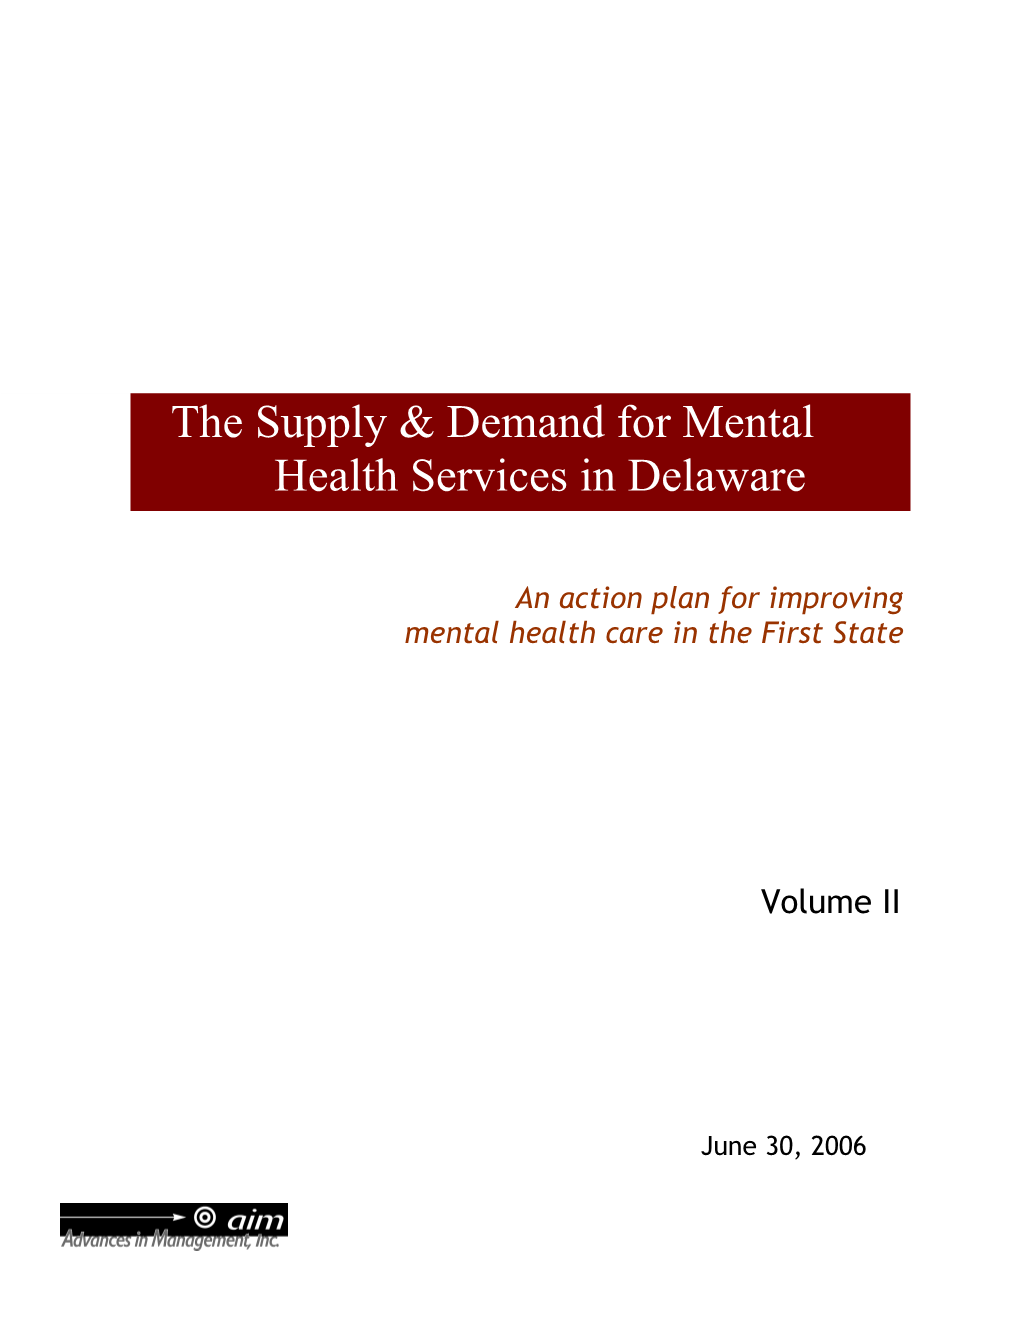 An Action Plan for Improving Mental Health Care in the Firststate